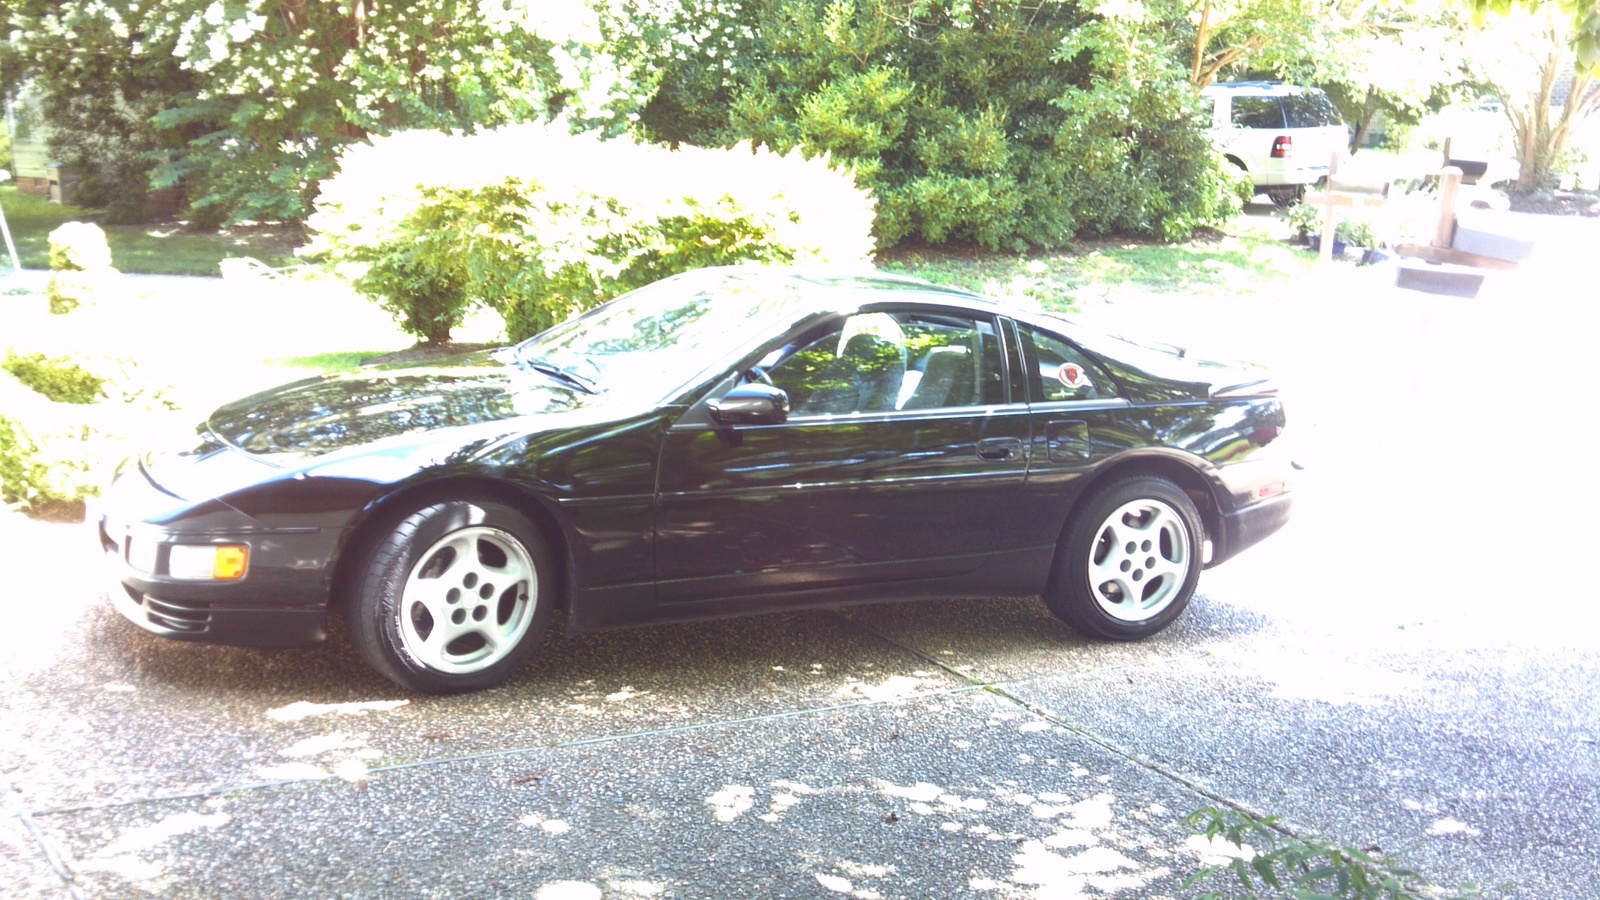 How much is car insurance for a 1992 nissan 300zx #8